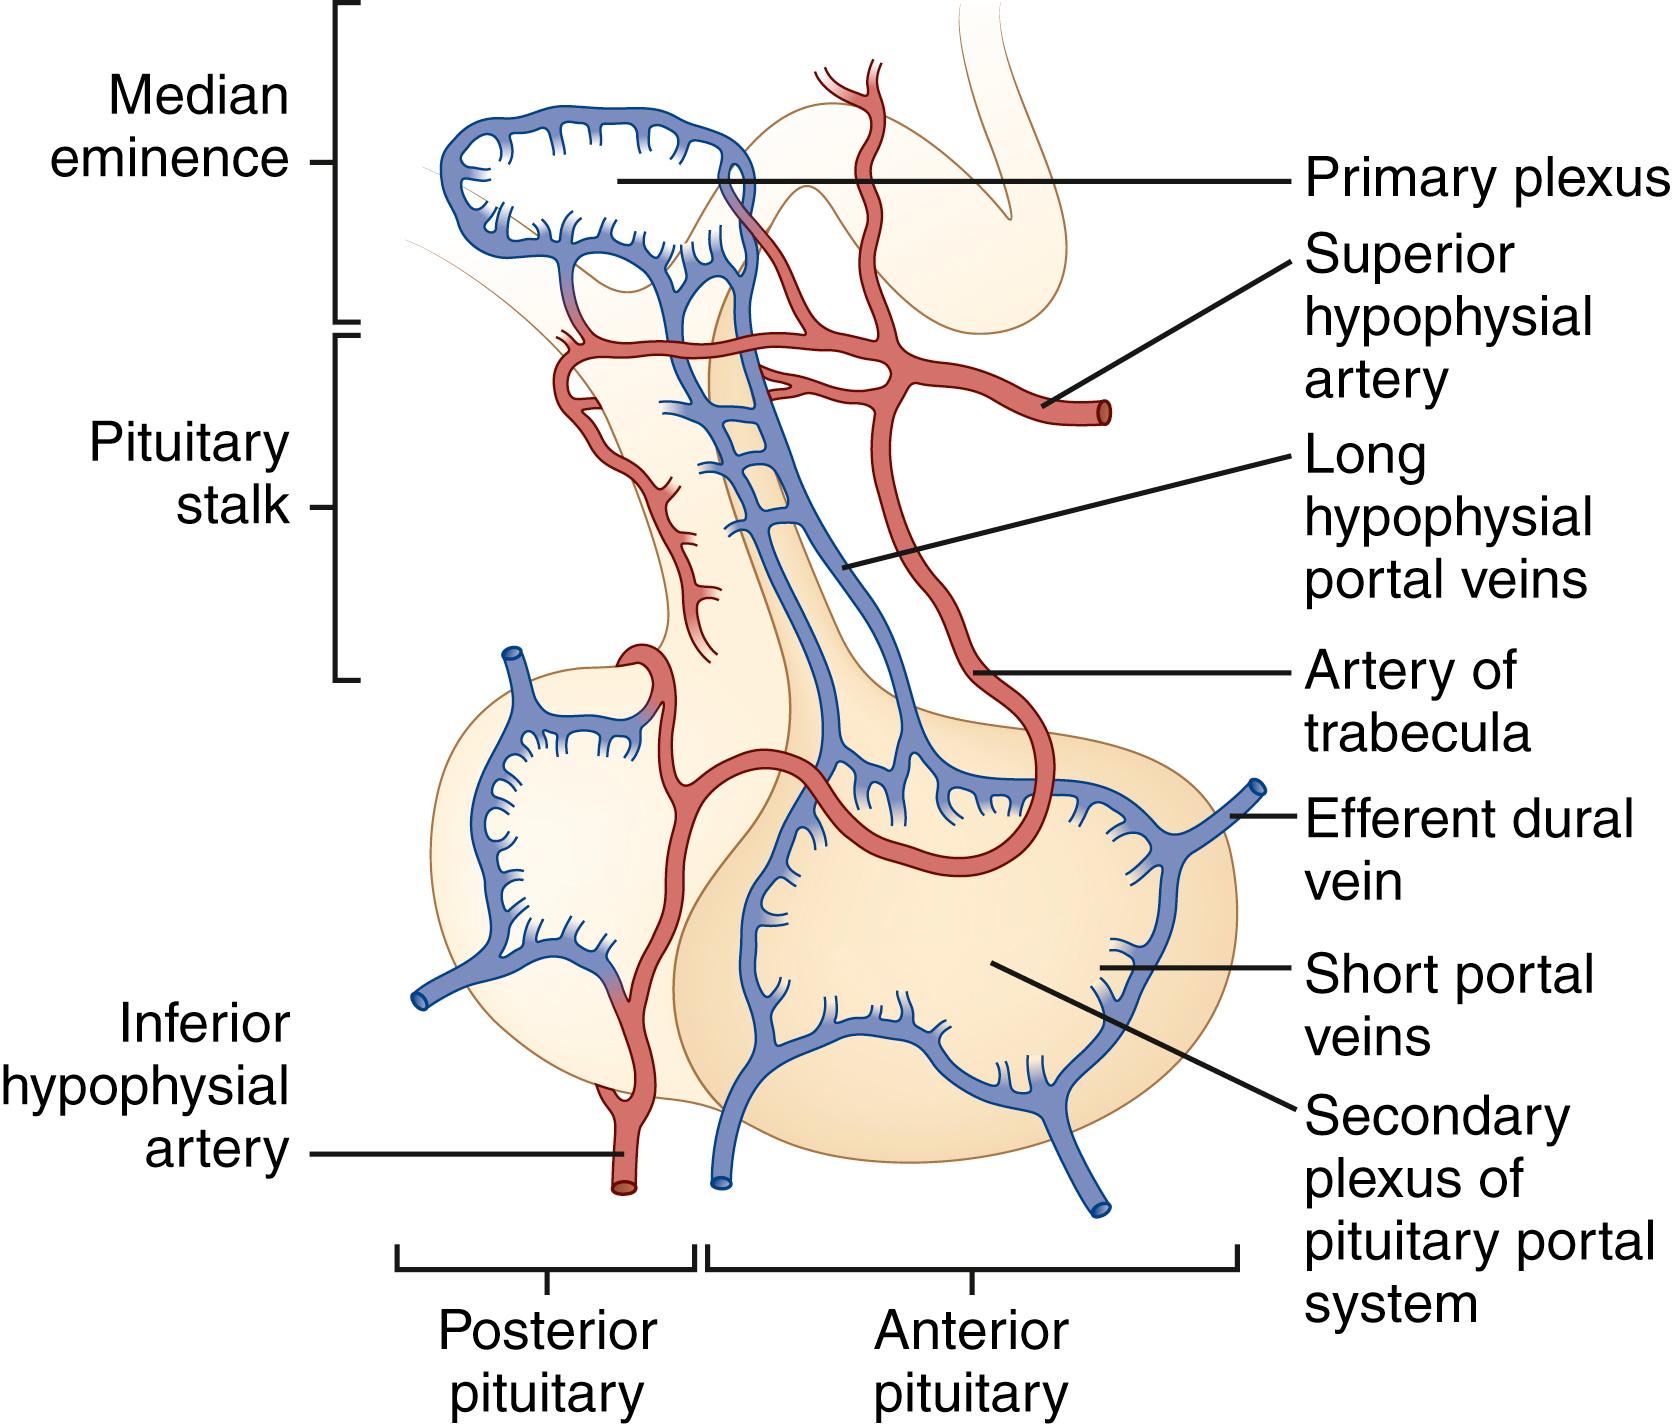 Fig. 50.4, Blood Supply of the Median Eminence and Pituitary Gland.